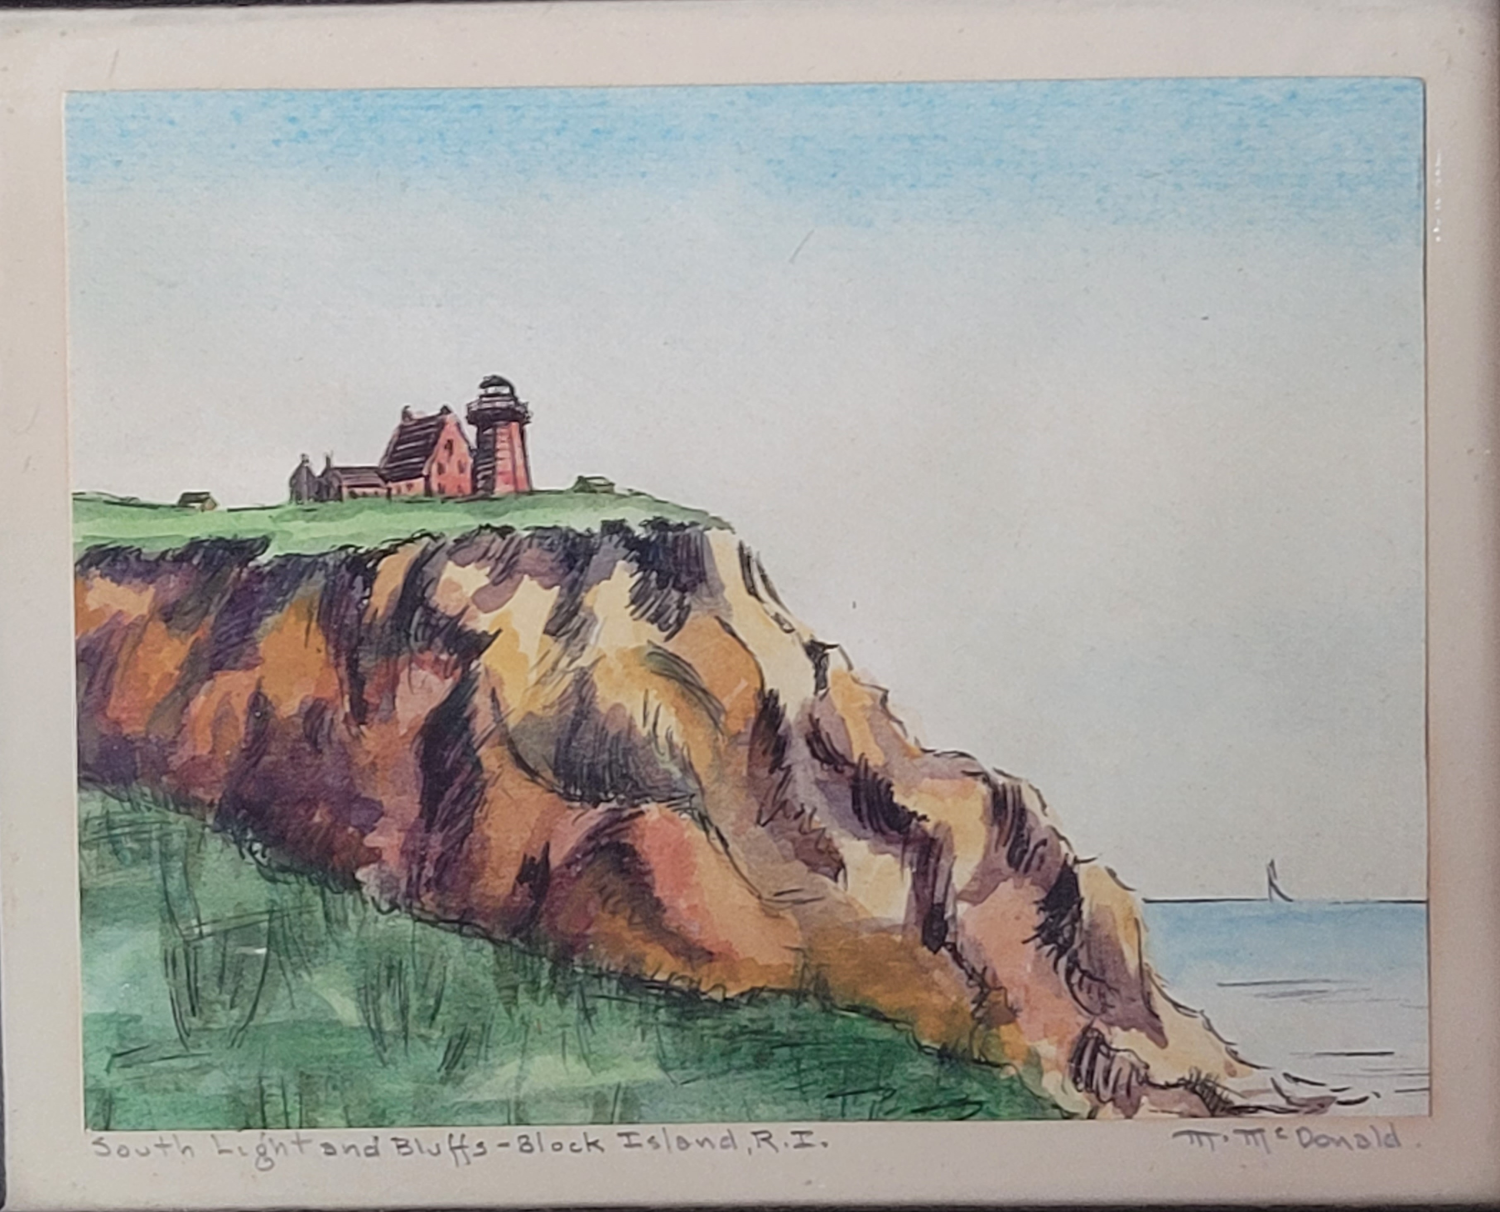 South Light and Bluffs - Block Island, R.I. by M. McDonald